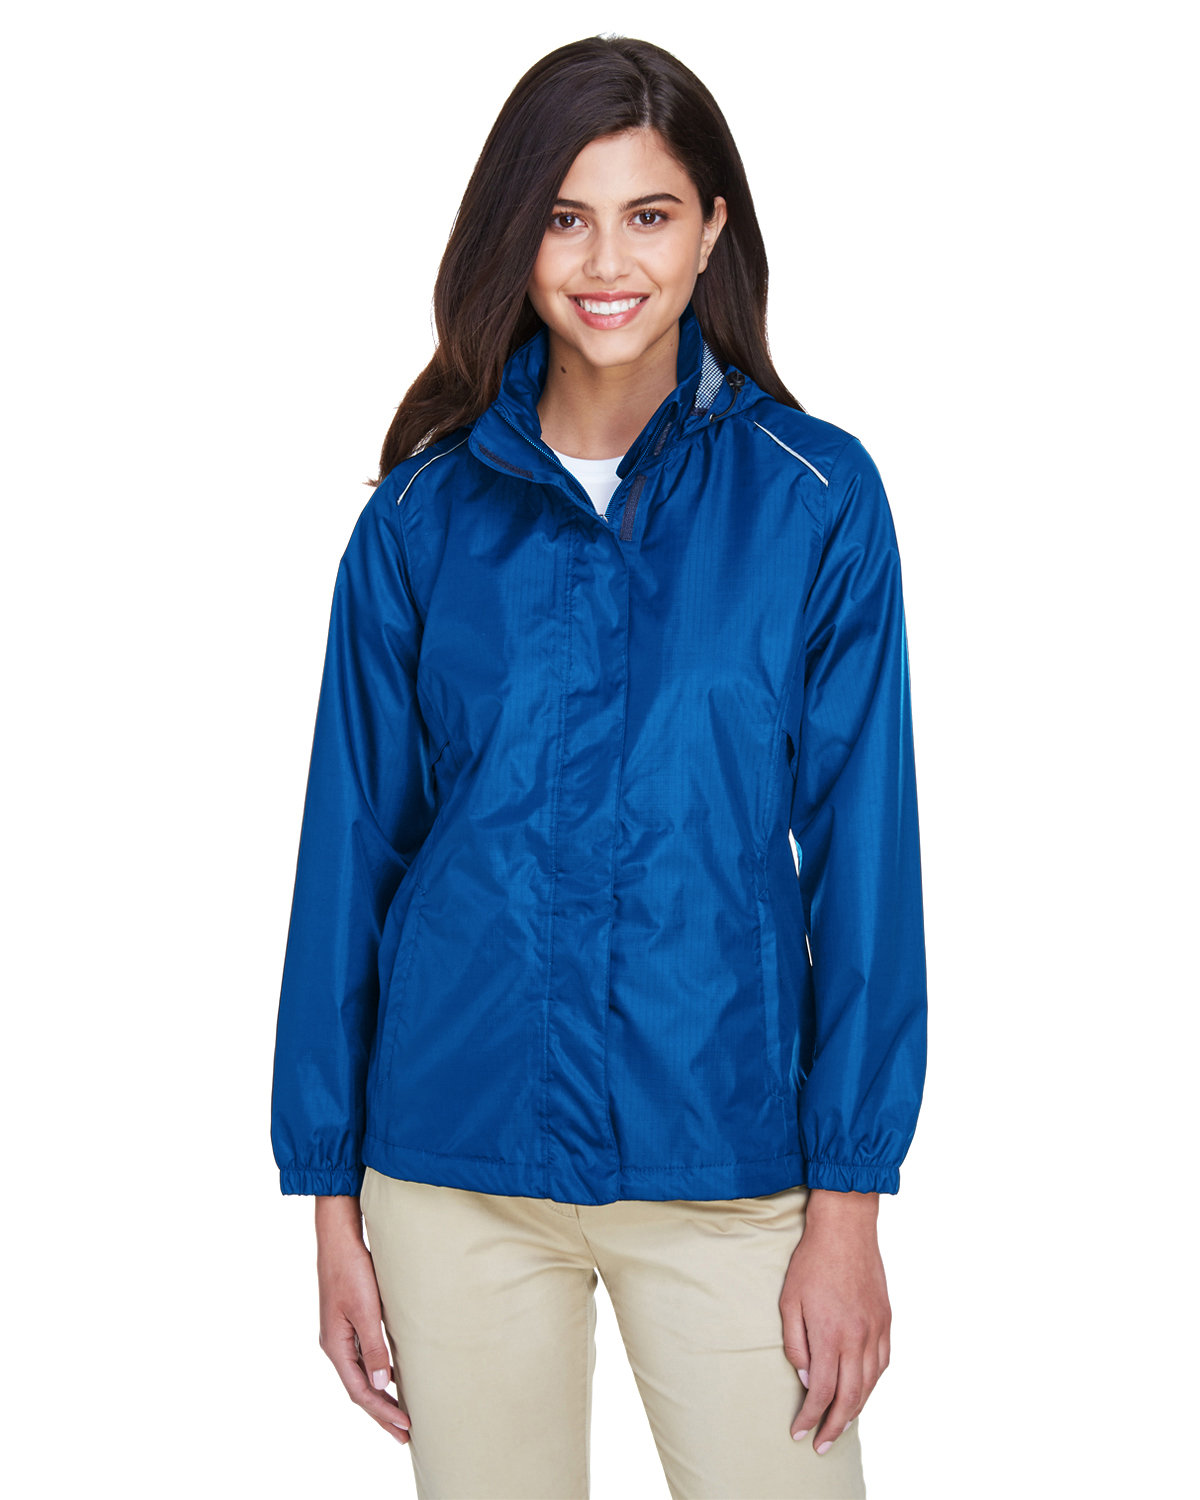 Front view of Ladies’ Climate Seam-Sealed Lightweight Variegated Ripstop Jacket